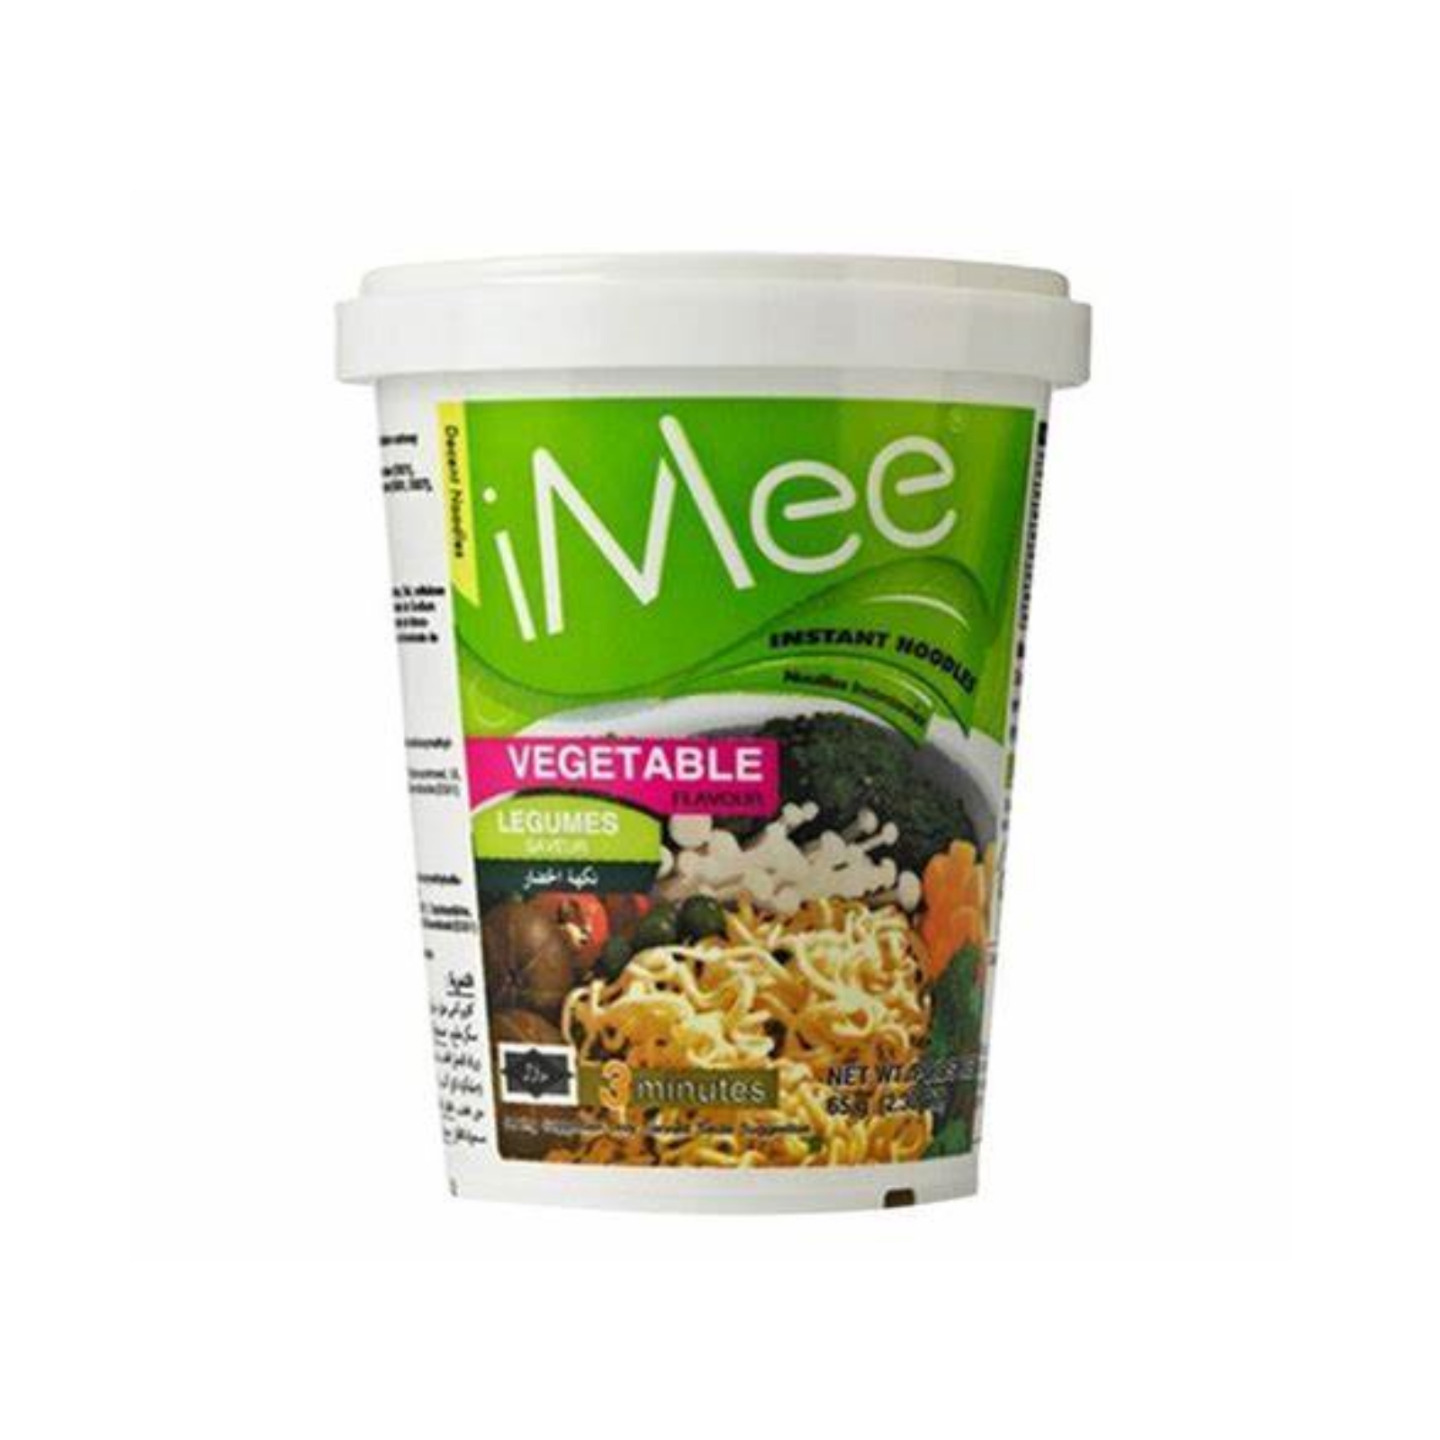 Imee Instant Cup Noodle - Vegetable Flavour 3 x 70 G